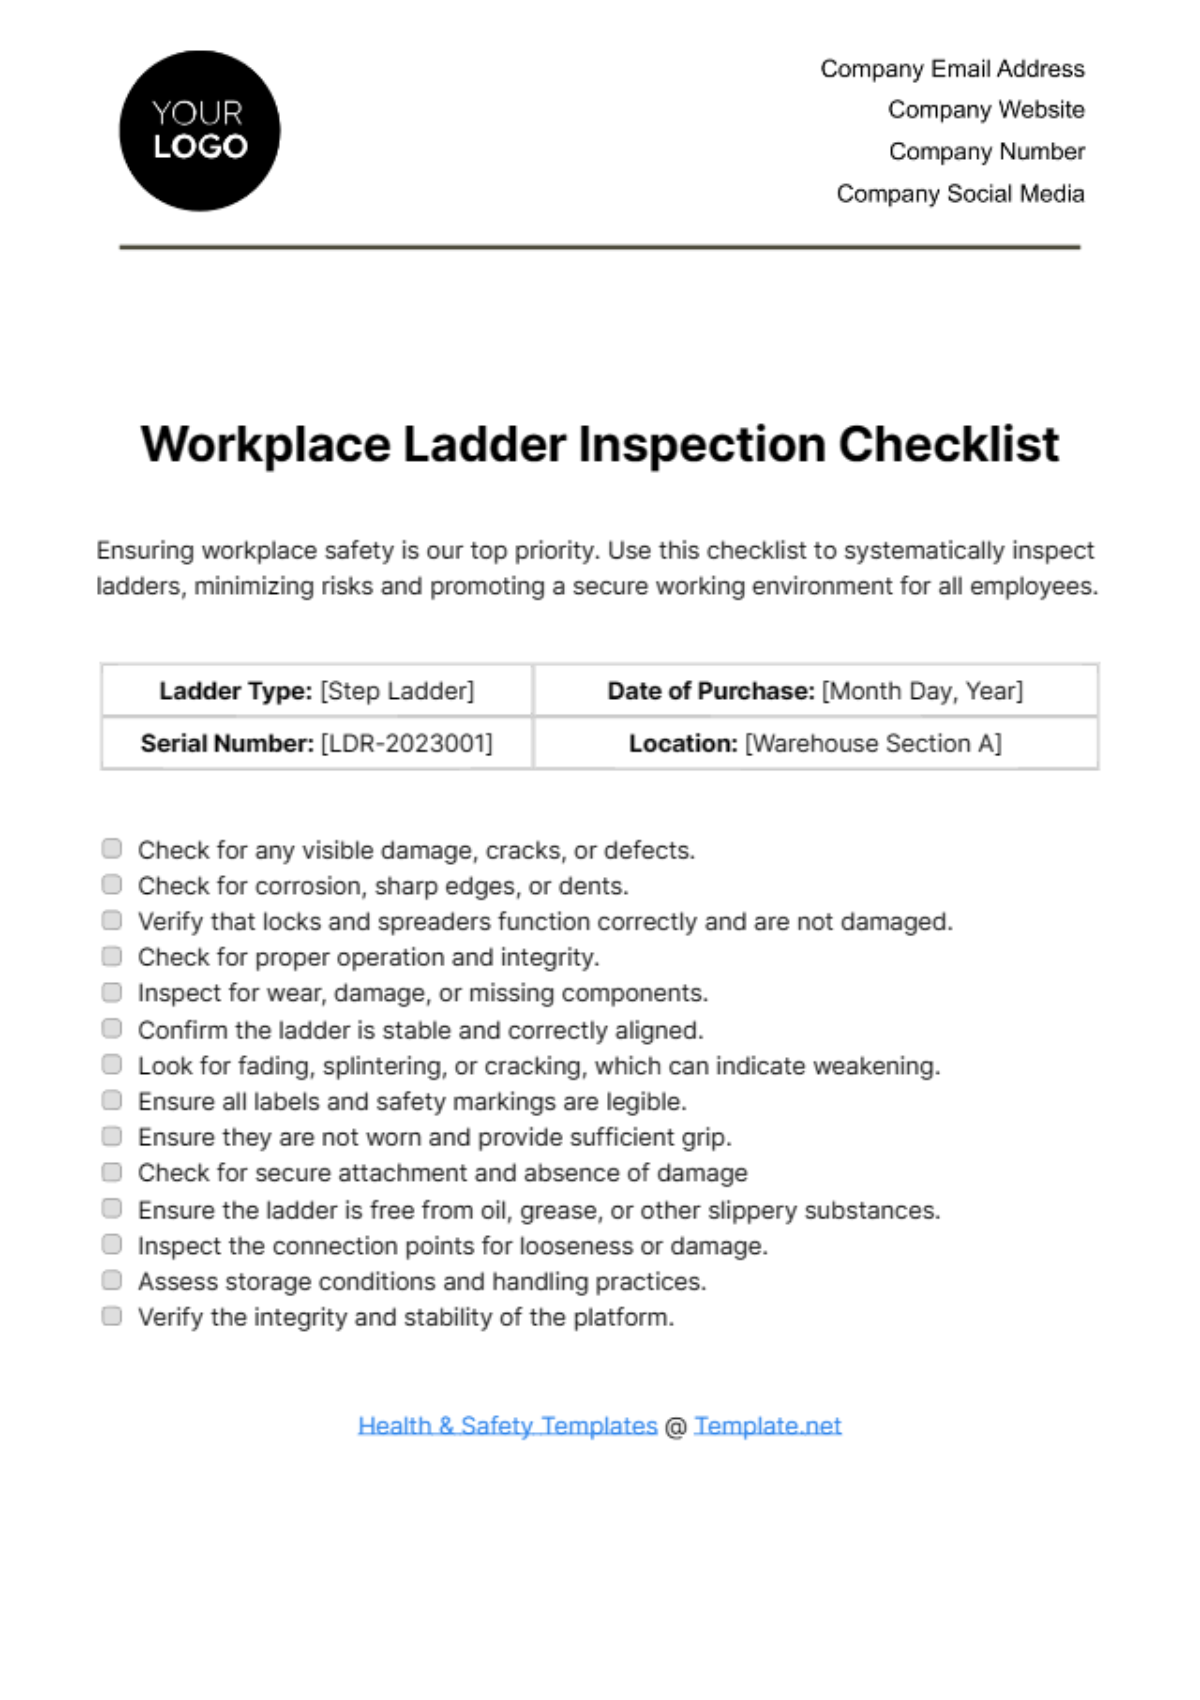 Workplace Ladder Inspection Checklist Template